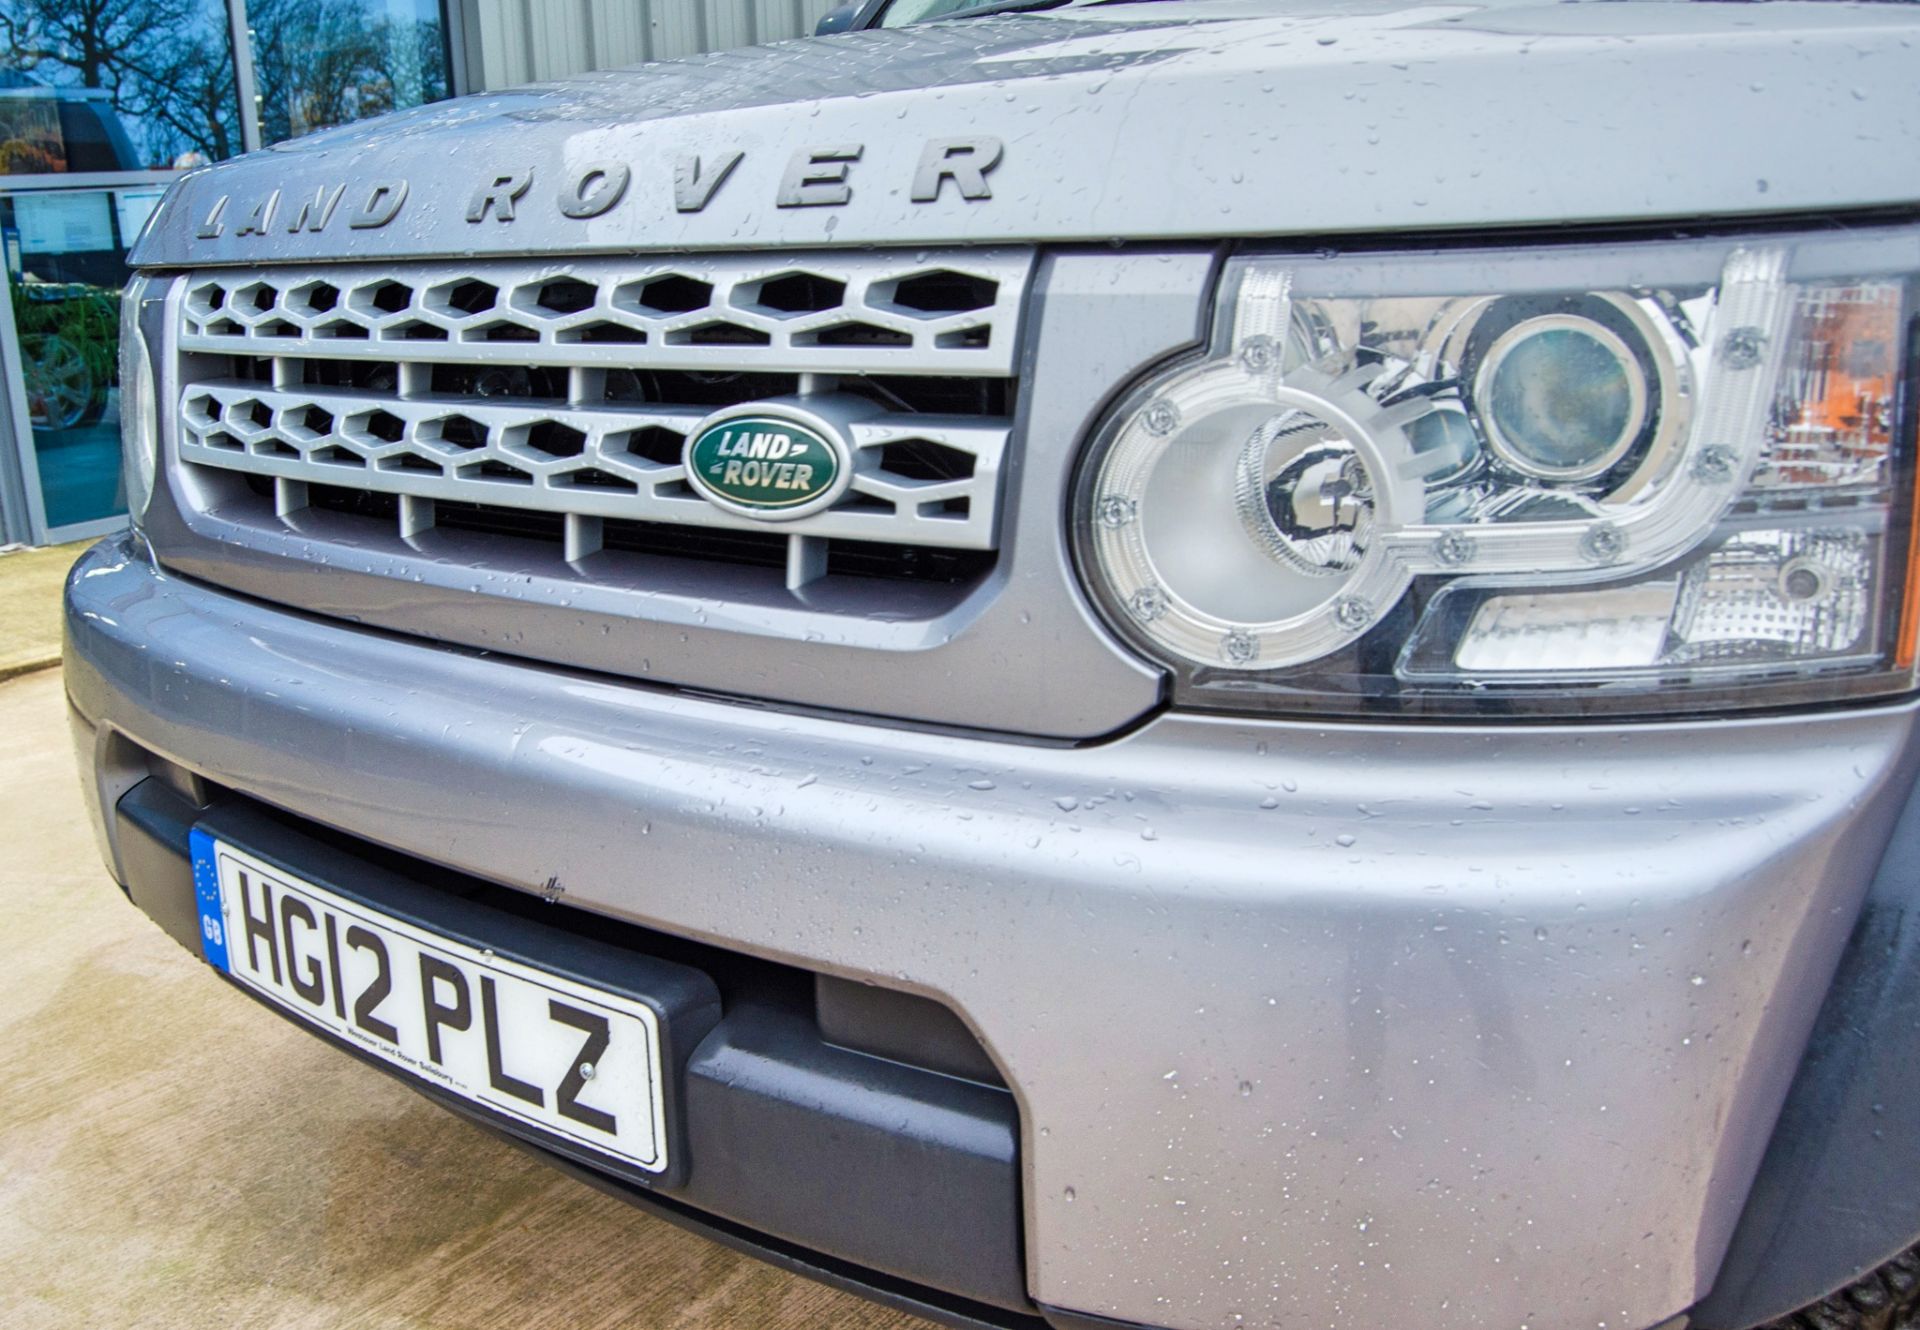 Land Rover Discovery 4 Commercial 2993cc TDV6 Auto light goods vehicle Registration Number: HG12 PLZ - Image 10 of 42